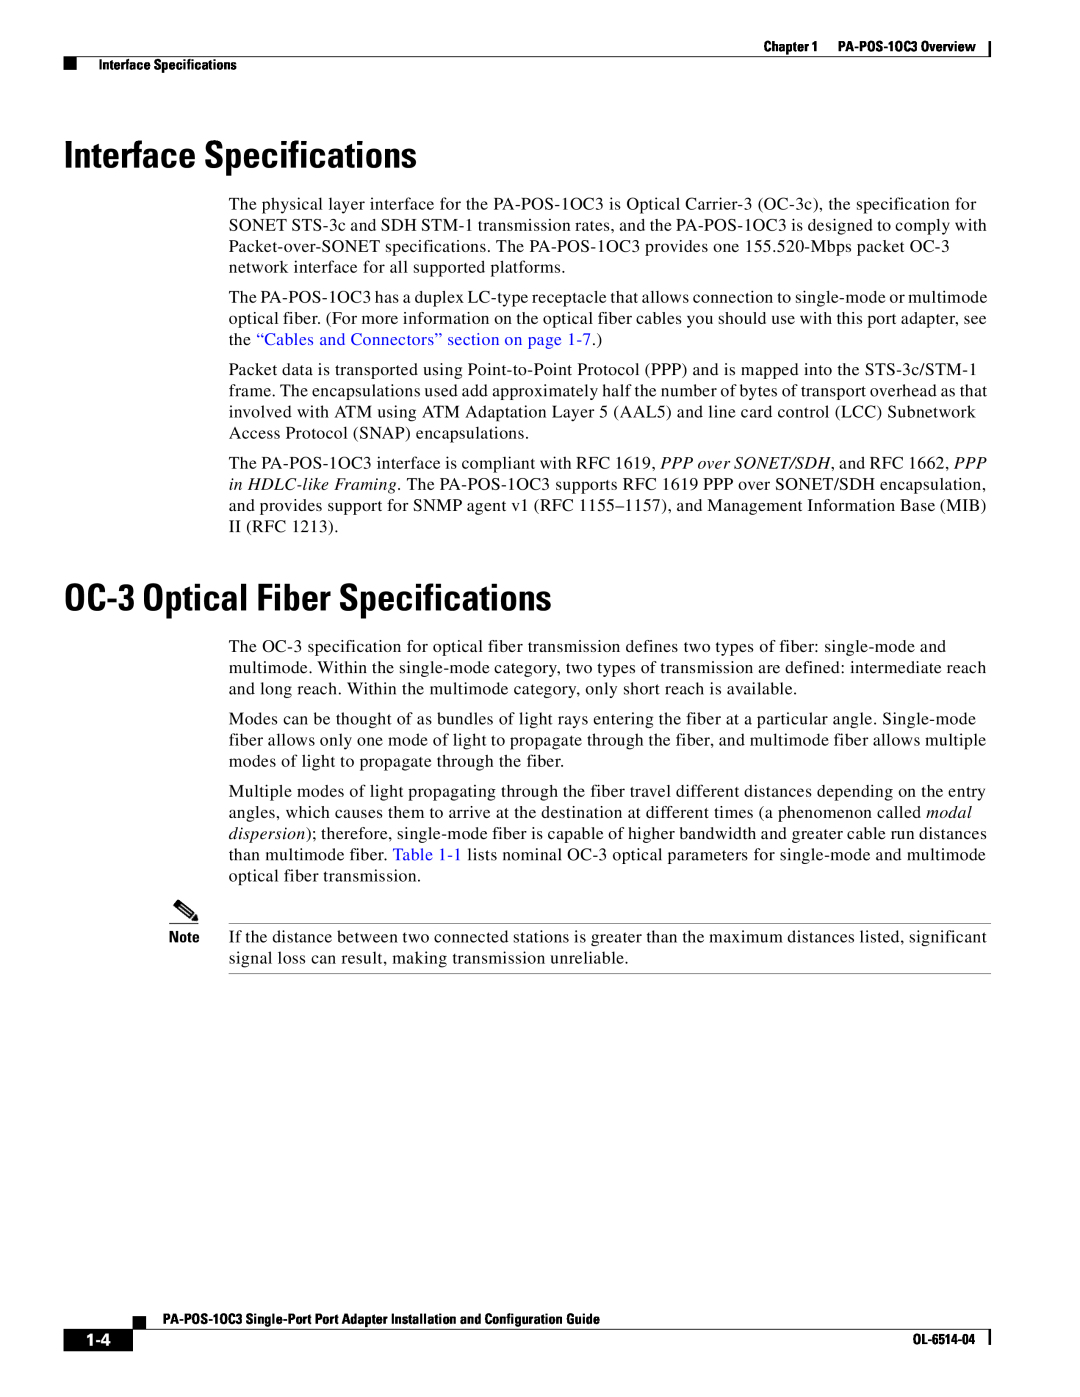 Cisco Systems PA-POS-2OC3, PA-POS-1OC3 manual Interface Specifications, OC-3 Optical Fiber Specifications 